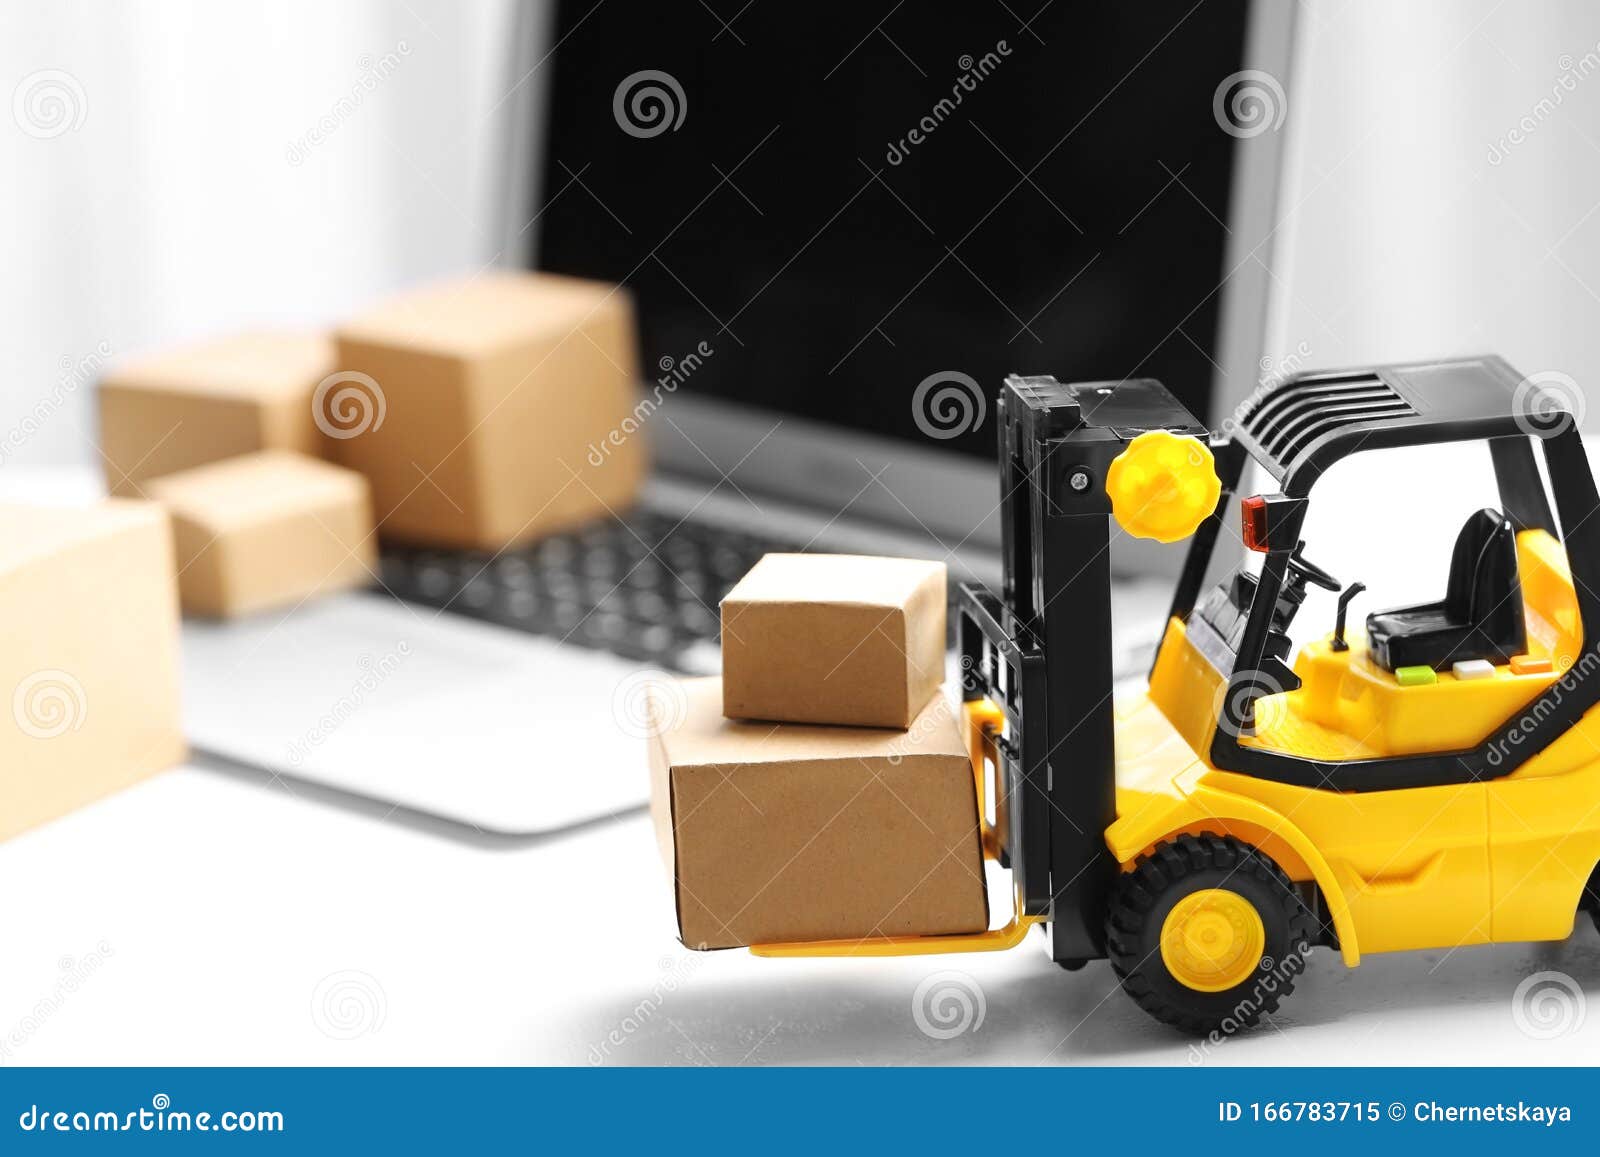 toy forklift with boxes near laptop. logistics and wholesale concept